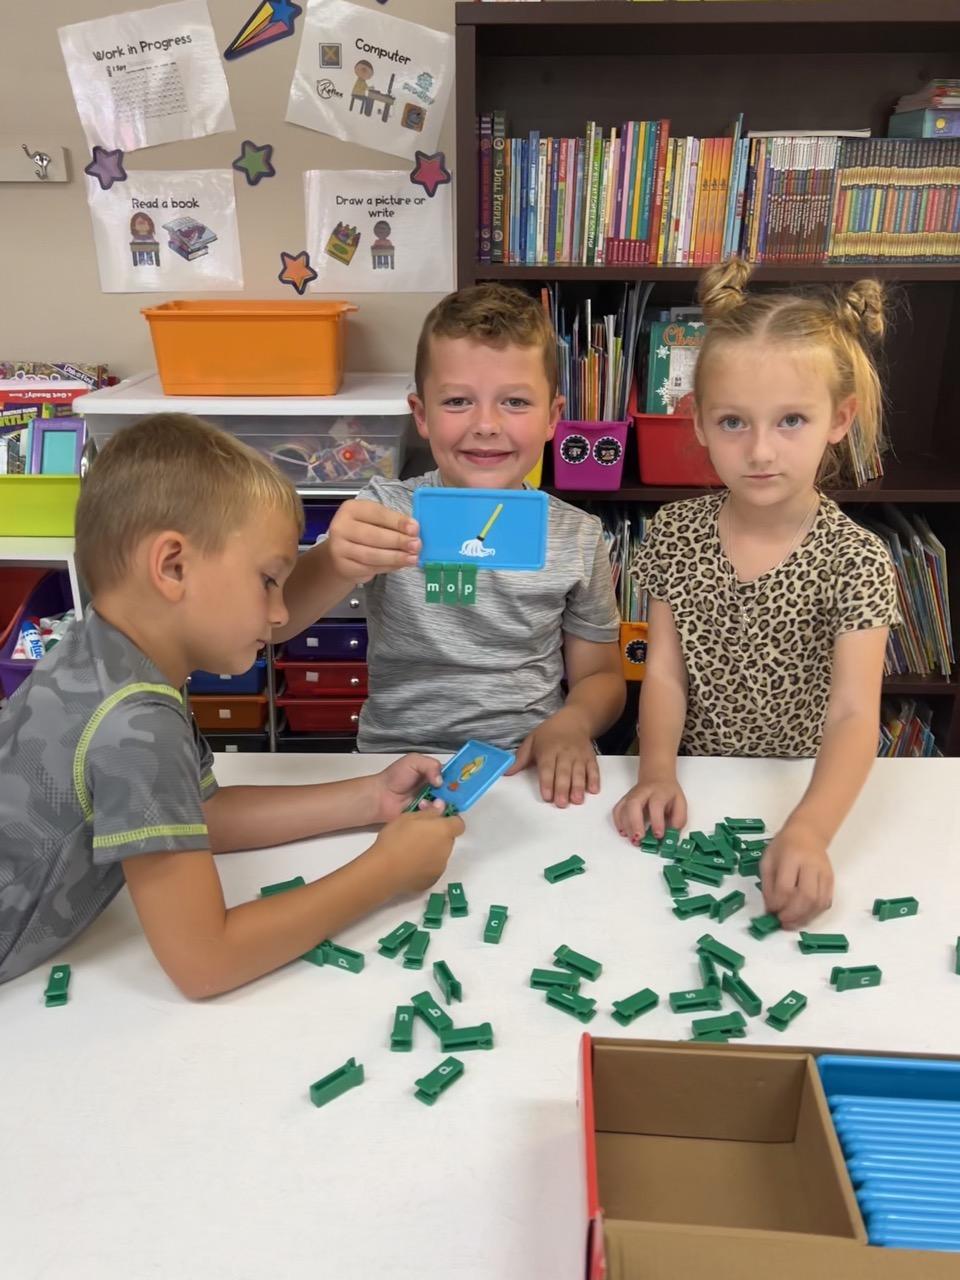 Adrian Zdrale, Wyatt Johnston and Ryann Dulemba work together using sound spelling cards